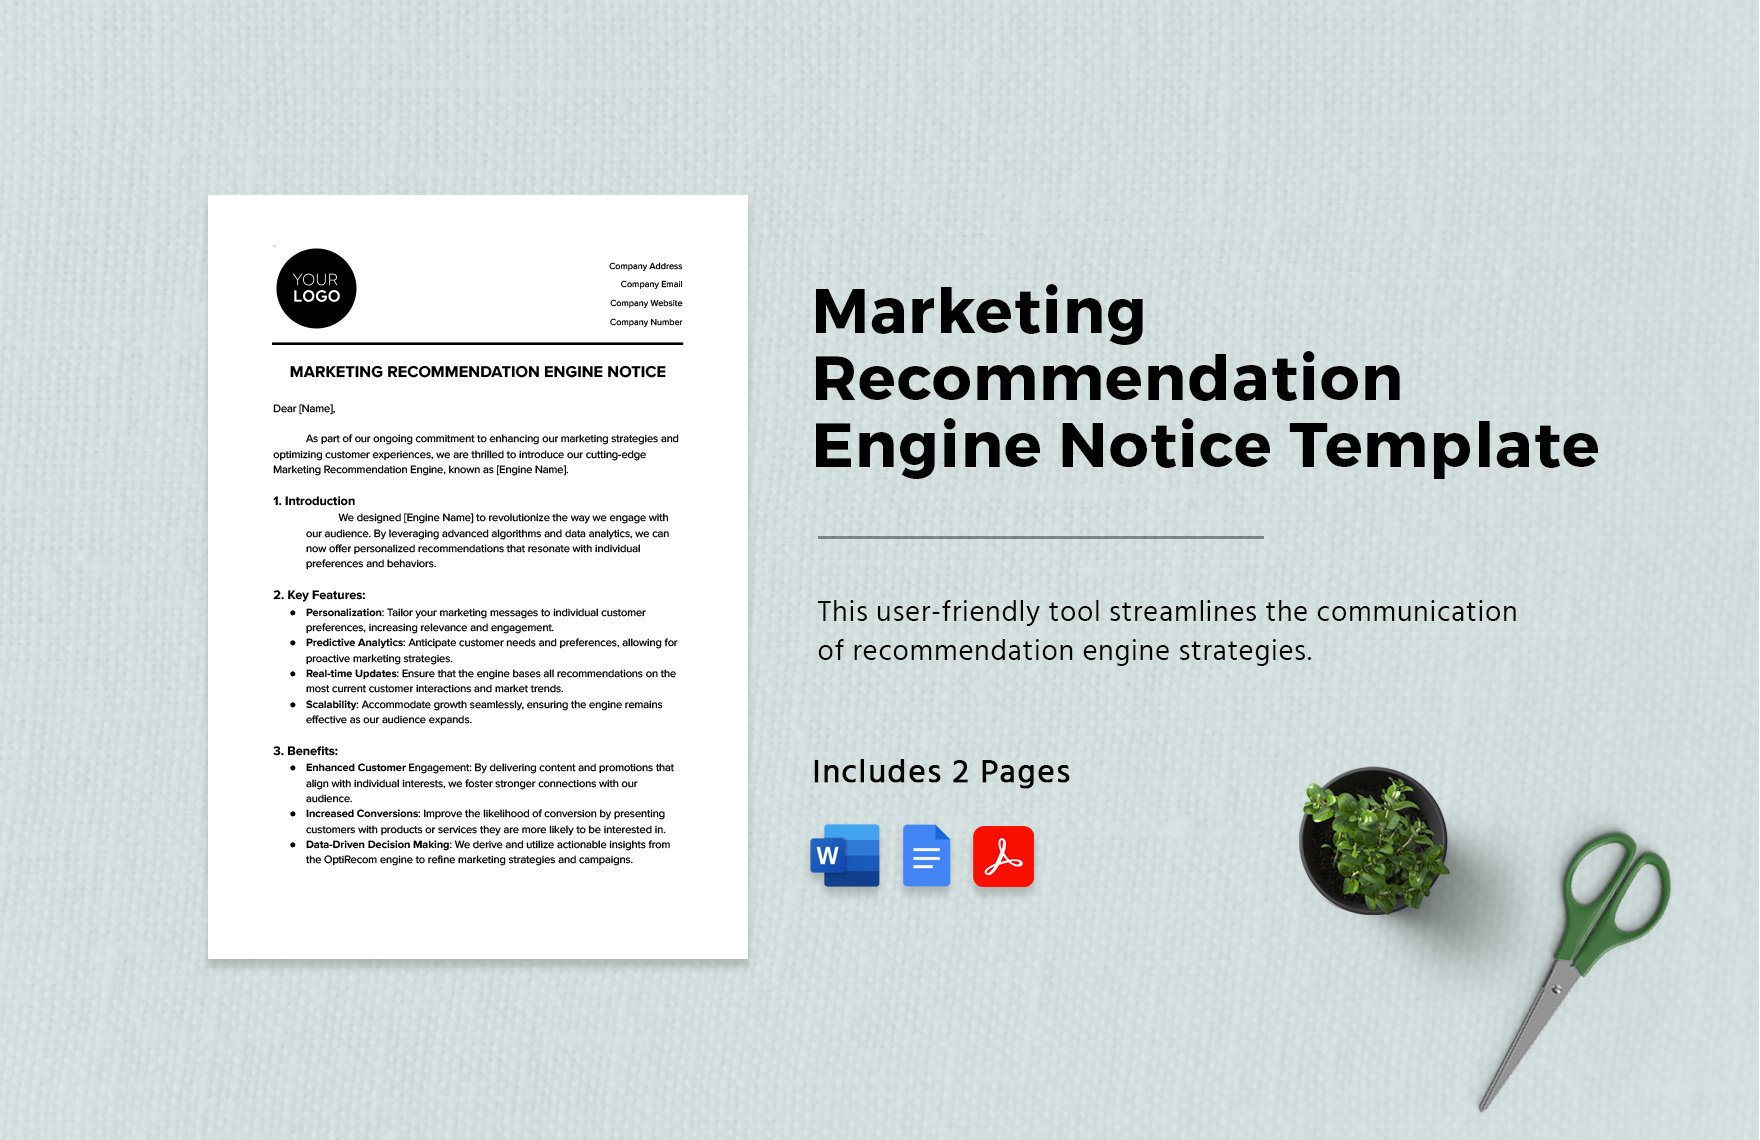 Marketing Recommendation Engine Notice Template